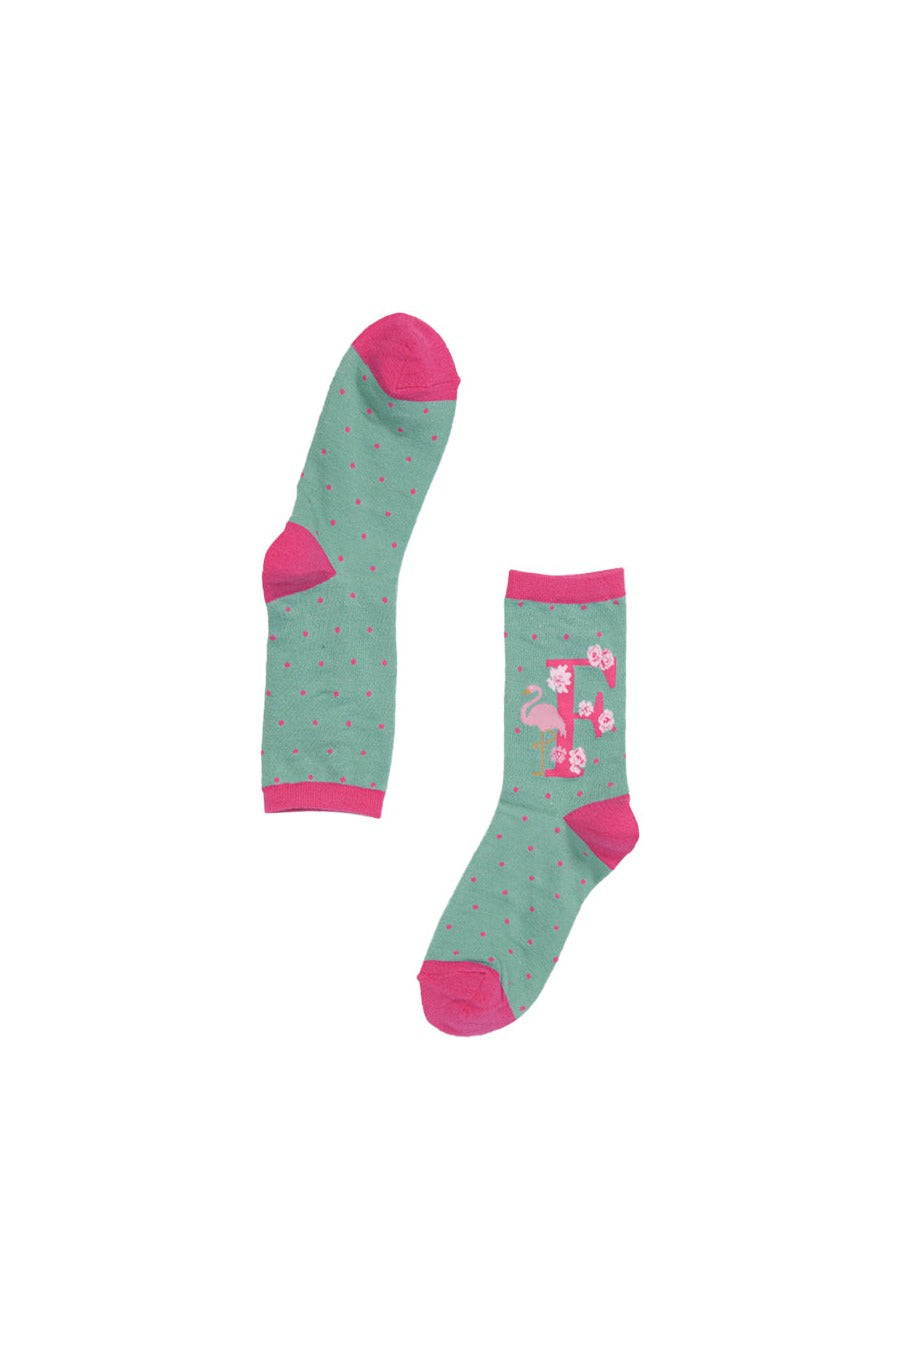 green, pink bamboo socks with the initial F